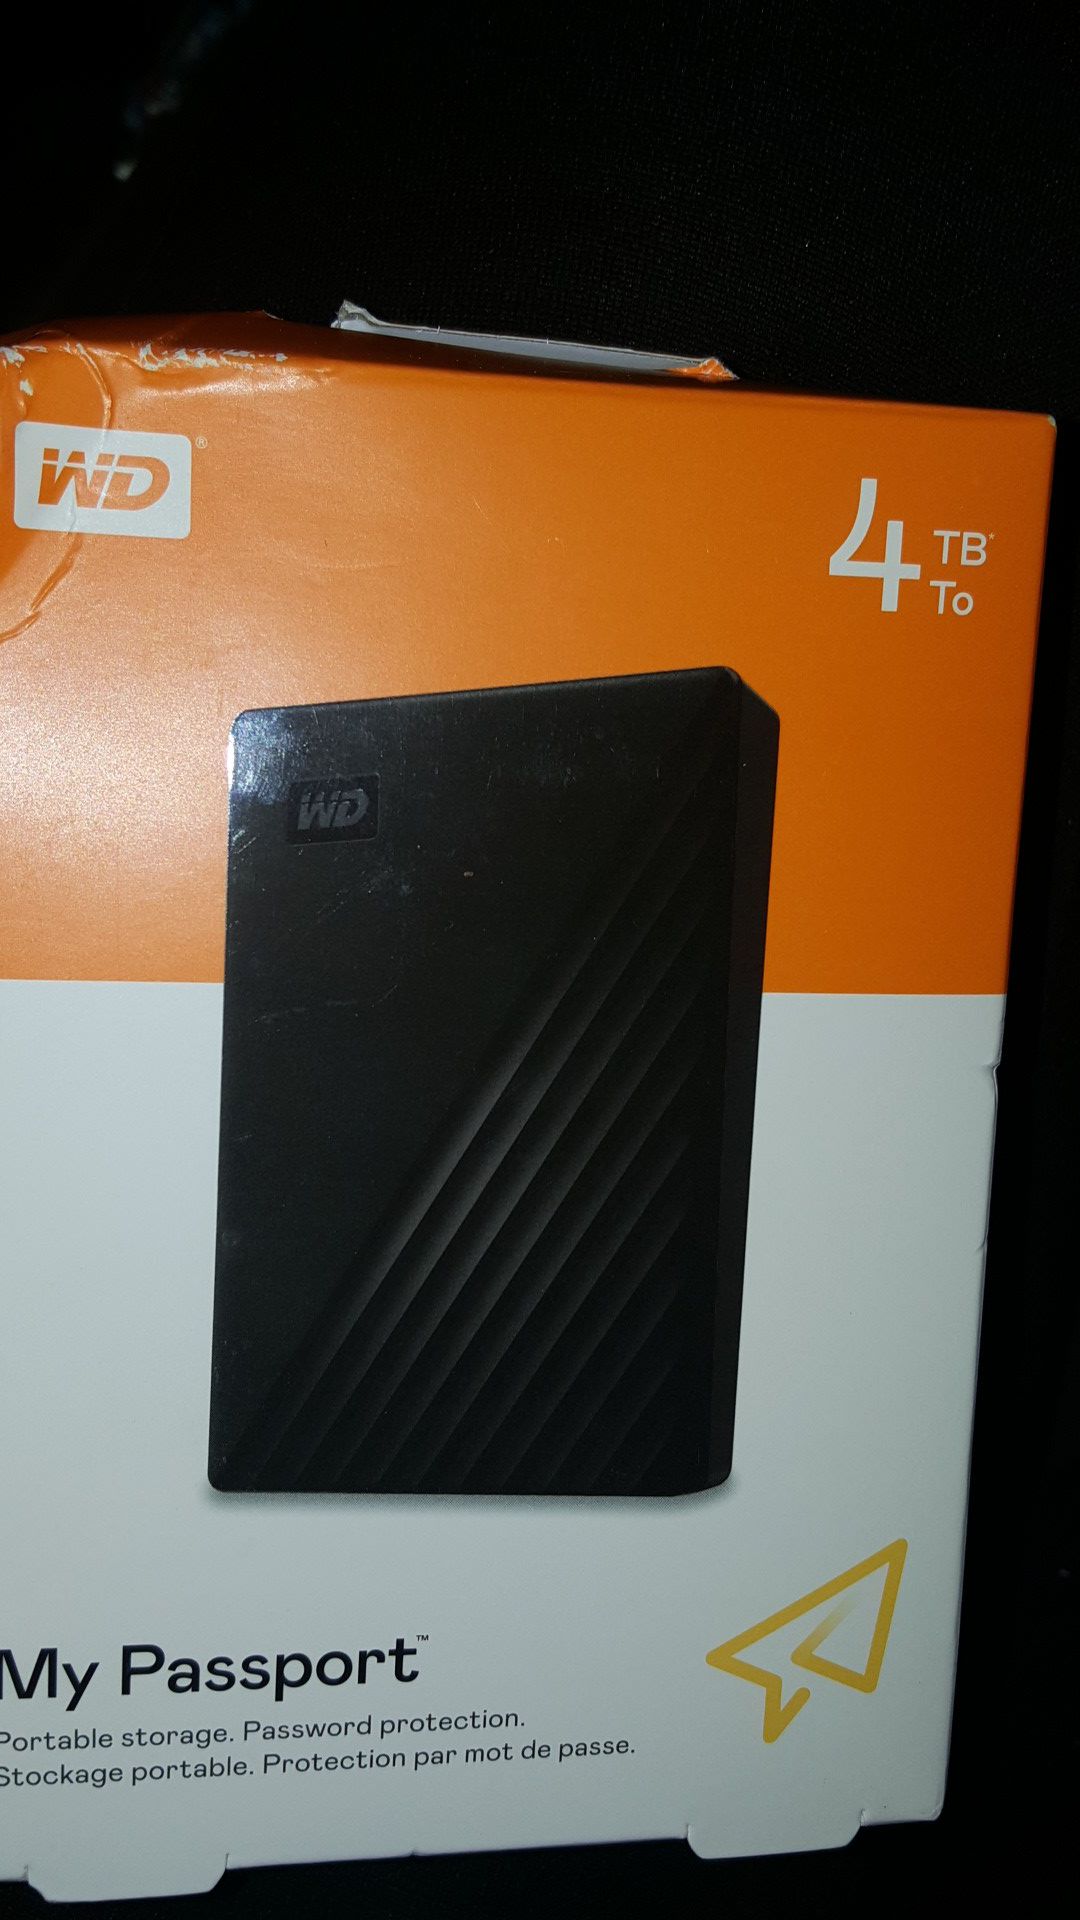 My passport portable hard drive wd discovery software